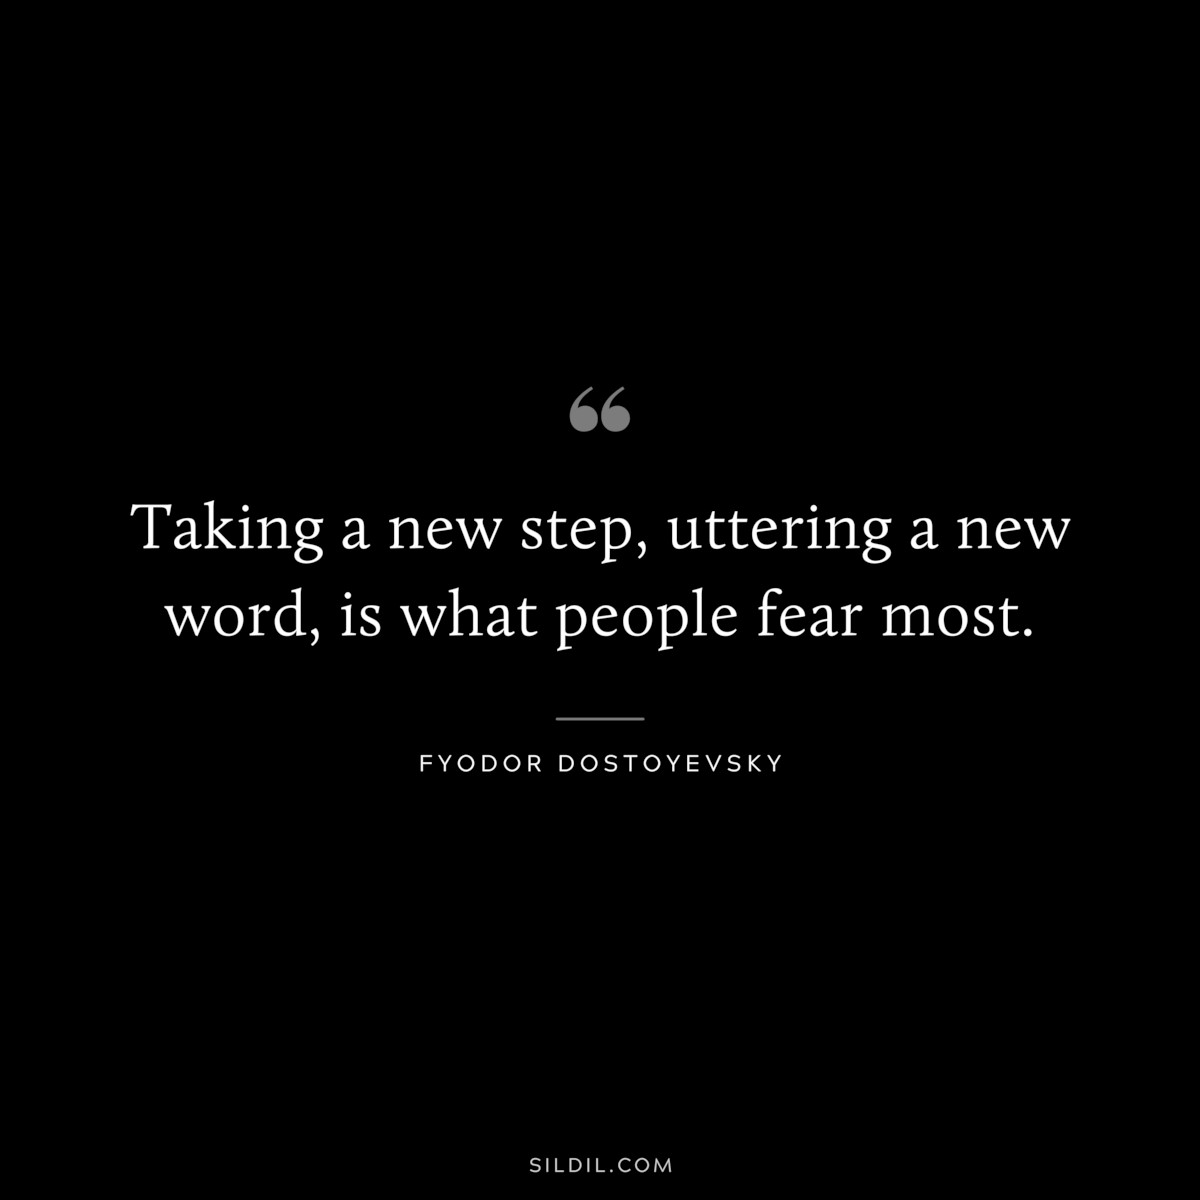 Taking a new step, uttering a new word, is what people fear most. ― Fyodor Dostoyevsky